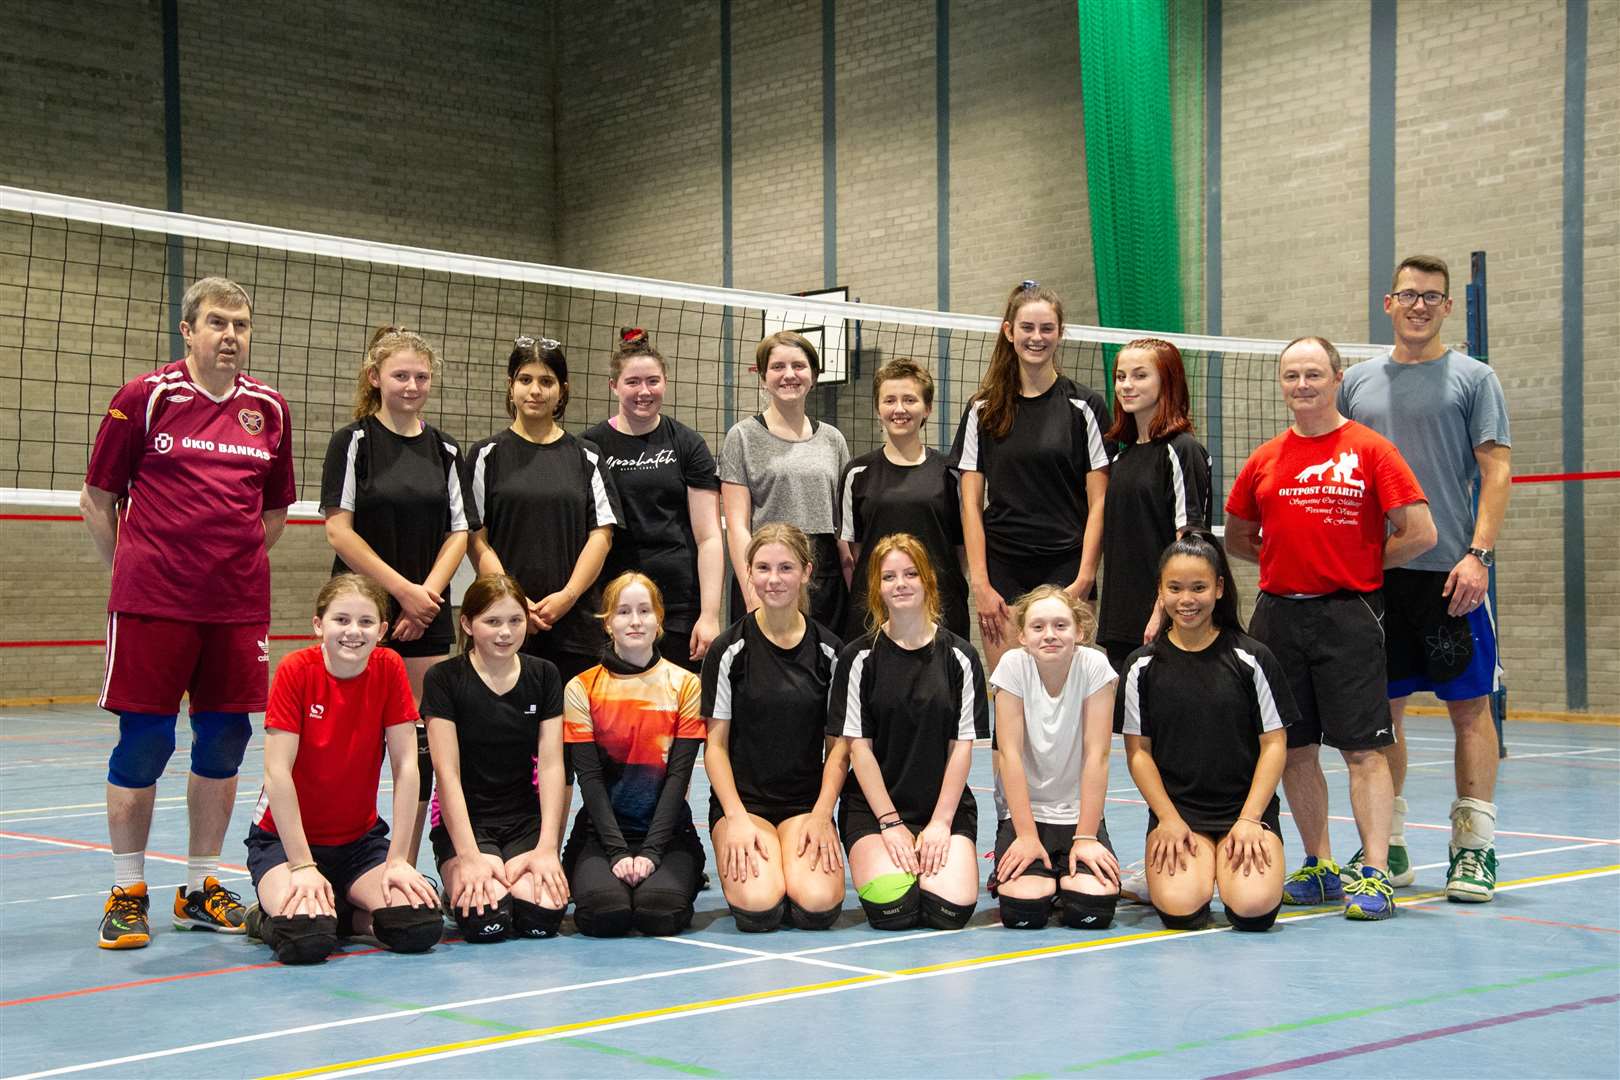 (Standing from left) George Orr, Kirsty Chalmers, Farah Ramadan, Freya Paterson, Emilija Lake, Sophia Heath, Kaela Theron, Helena Neall, Mick Hilton, Perry Johnson. (Kneeling from left) Holly Gray, Lucy Fraser, Sophie Foster, Lily Avenell, Imogen Hilton, Jessica McDonald, Zoey Simangan.